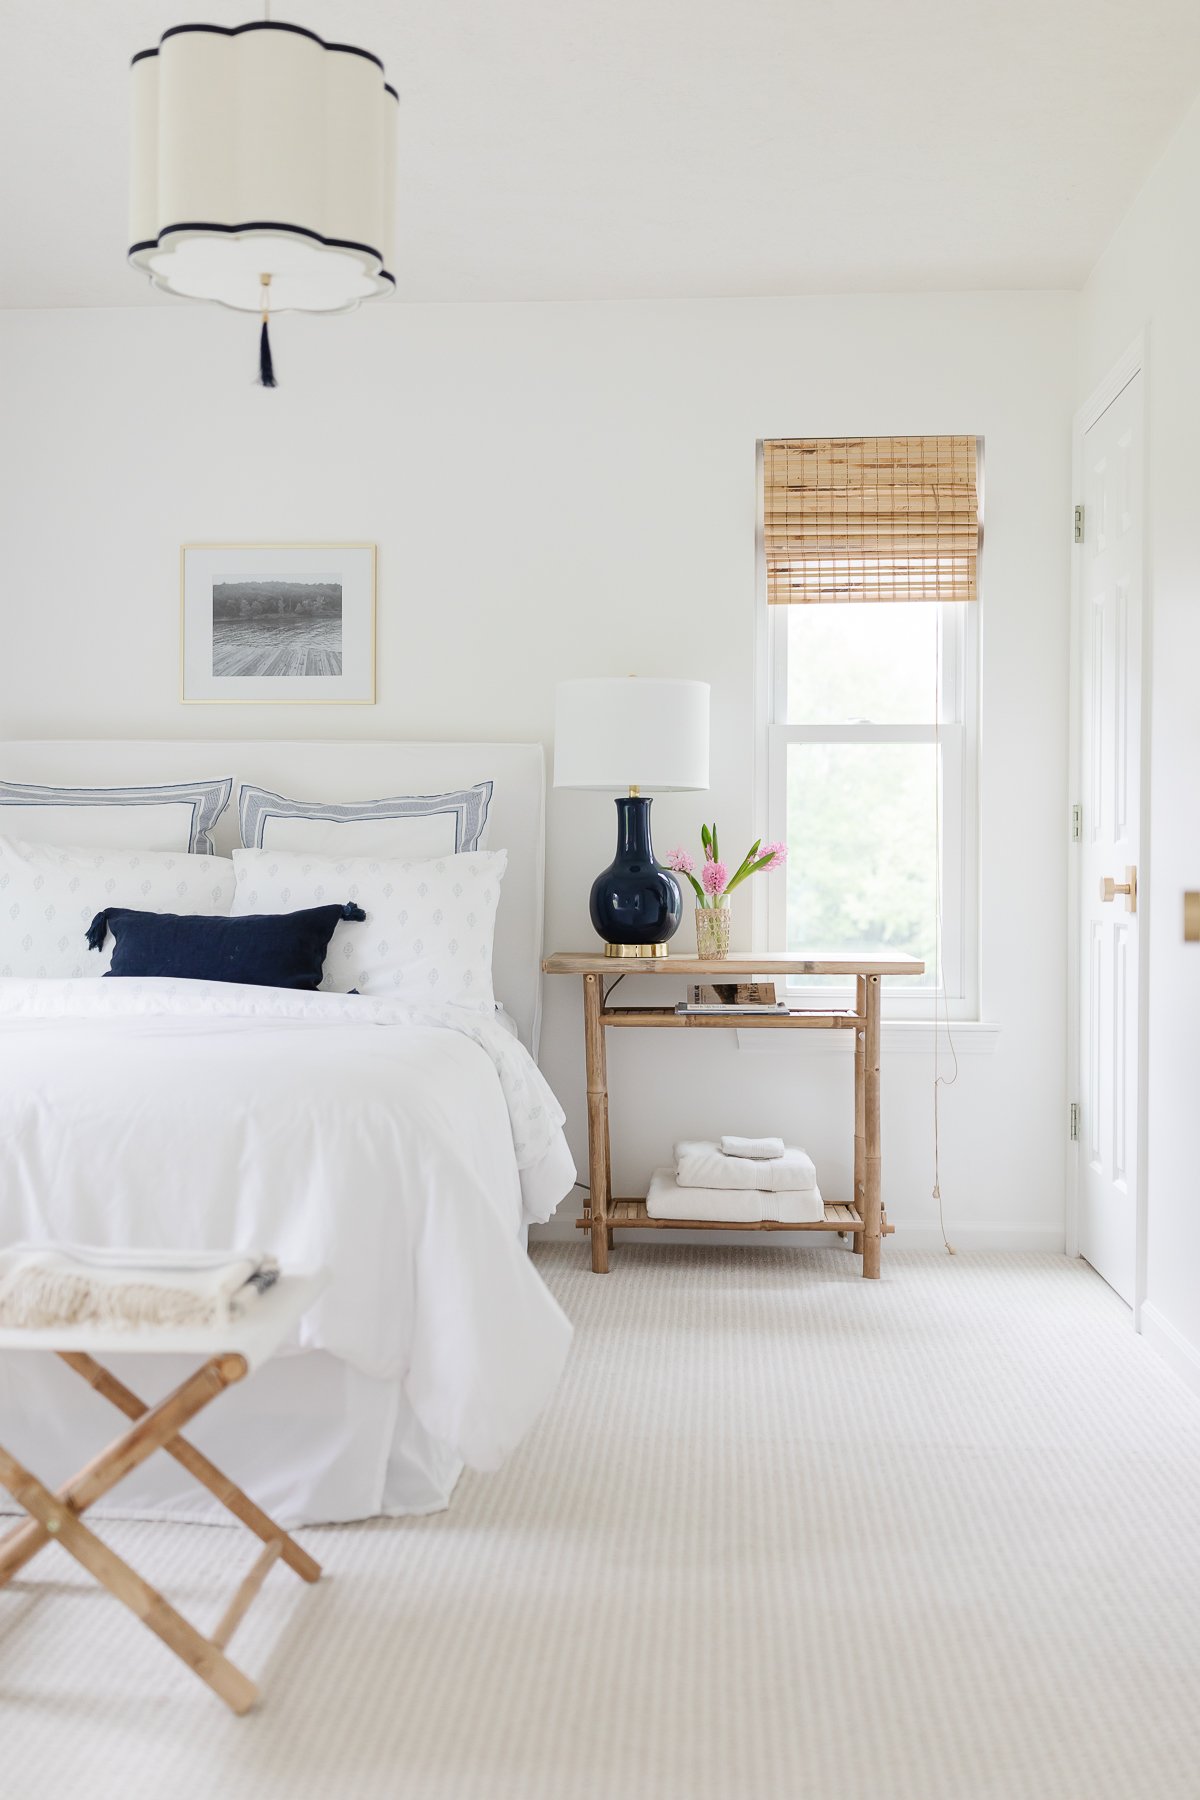 A white bedroom with neutral furnishings